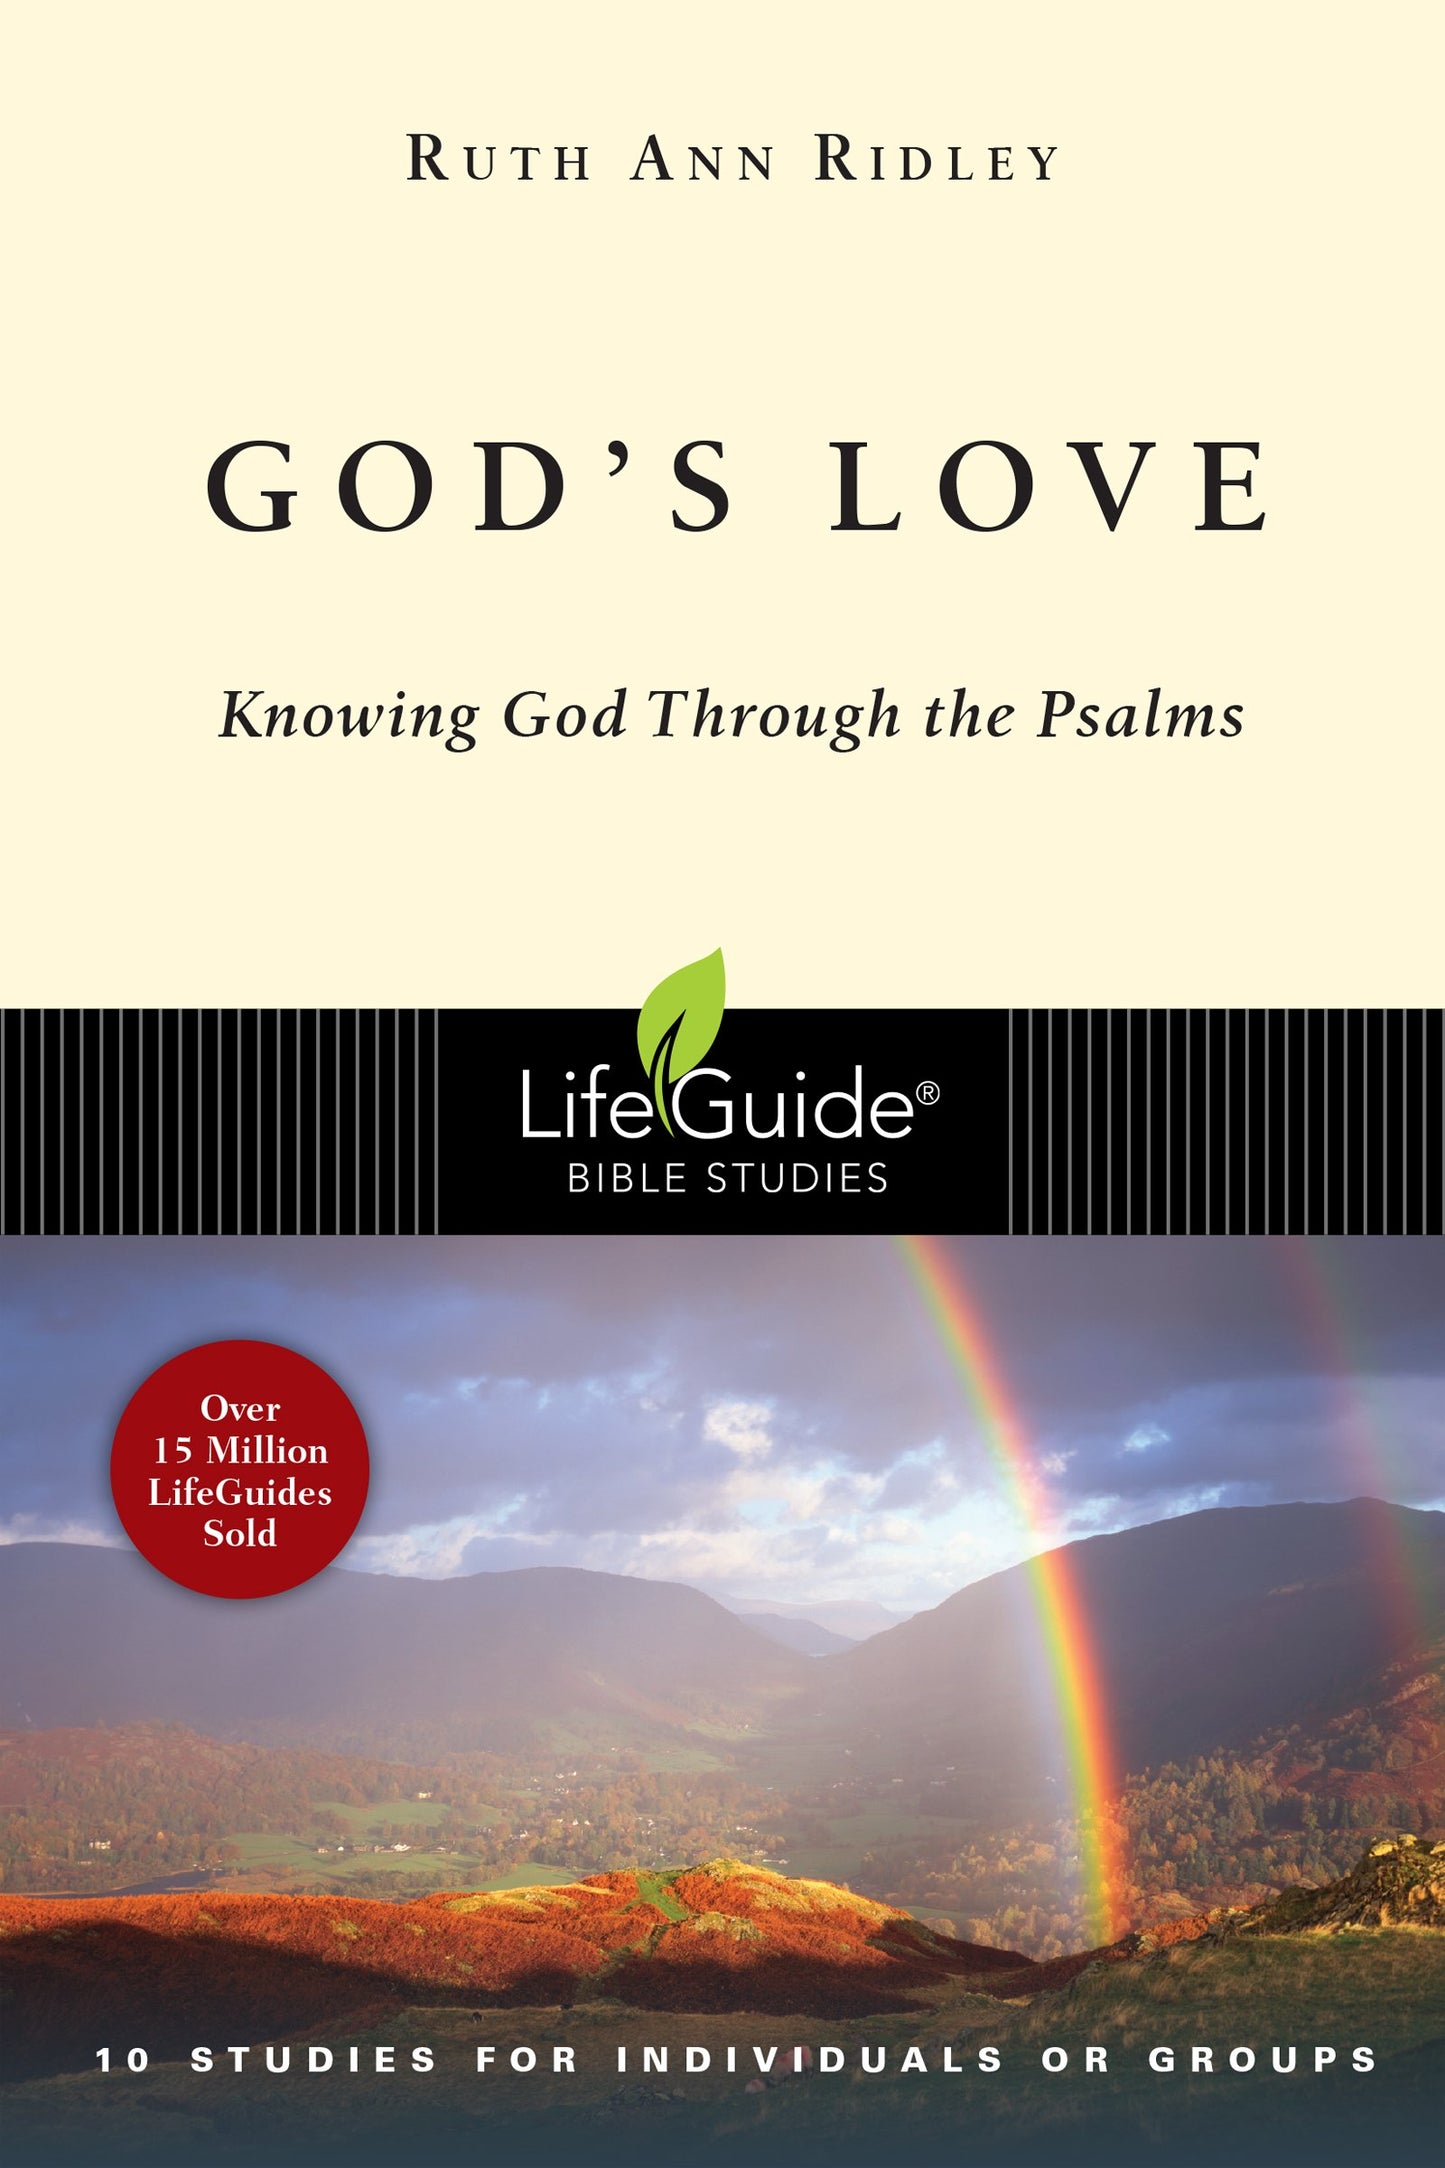 God's Love: Knowing God Through the Psalms (LifeGuide Bible Studies)